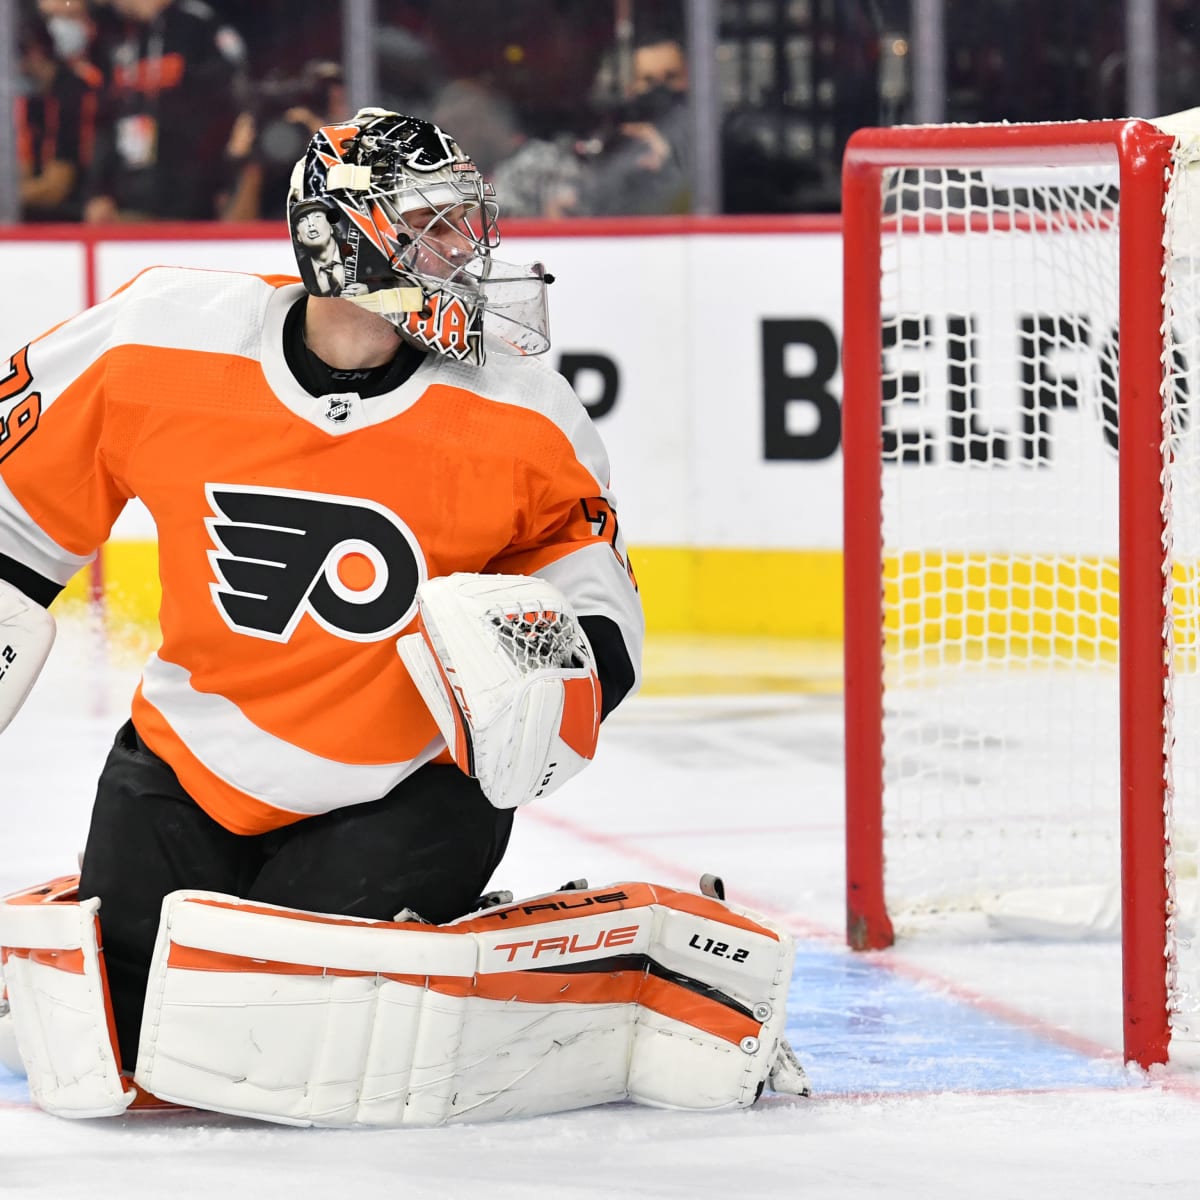 Inside the Flyers: Rookie goalie making believers out of Flyers